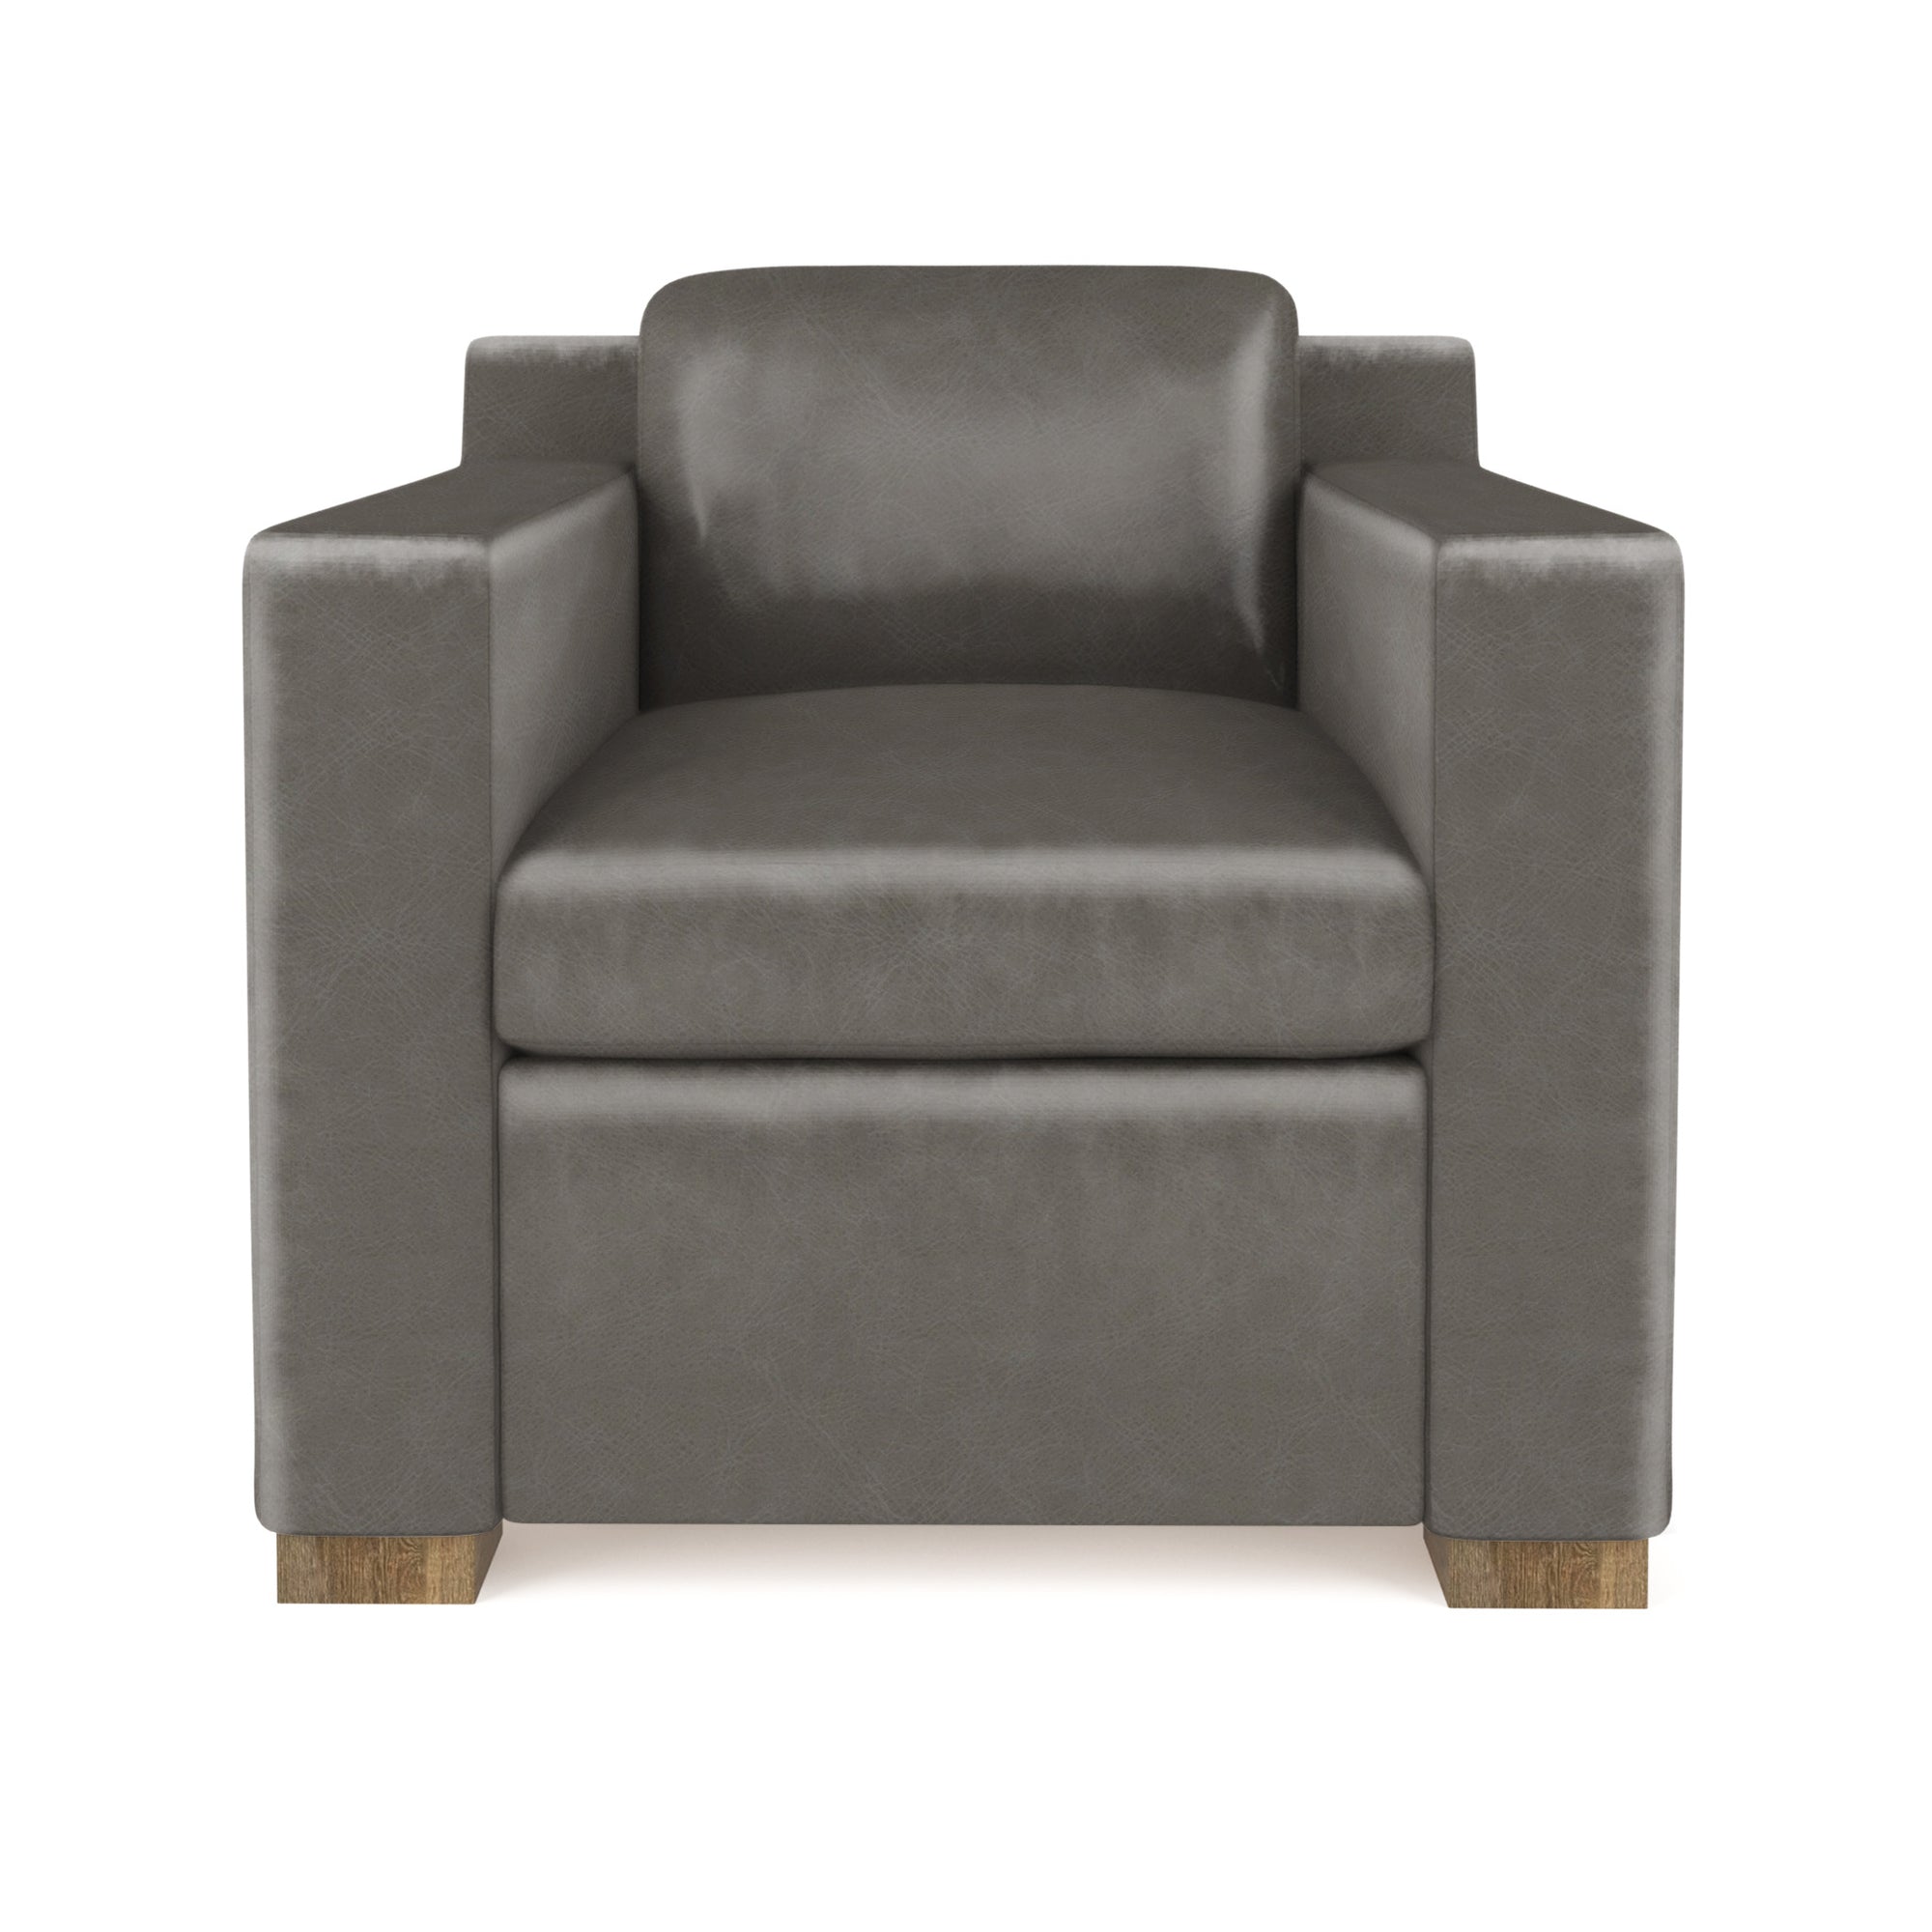 Mercer Chair - Pumice Vintage Leather